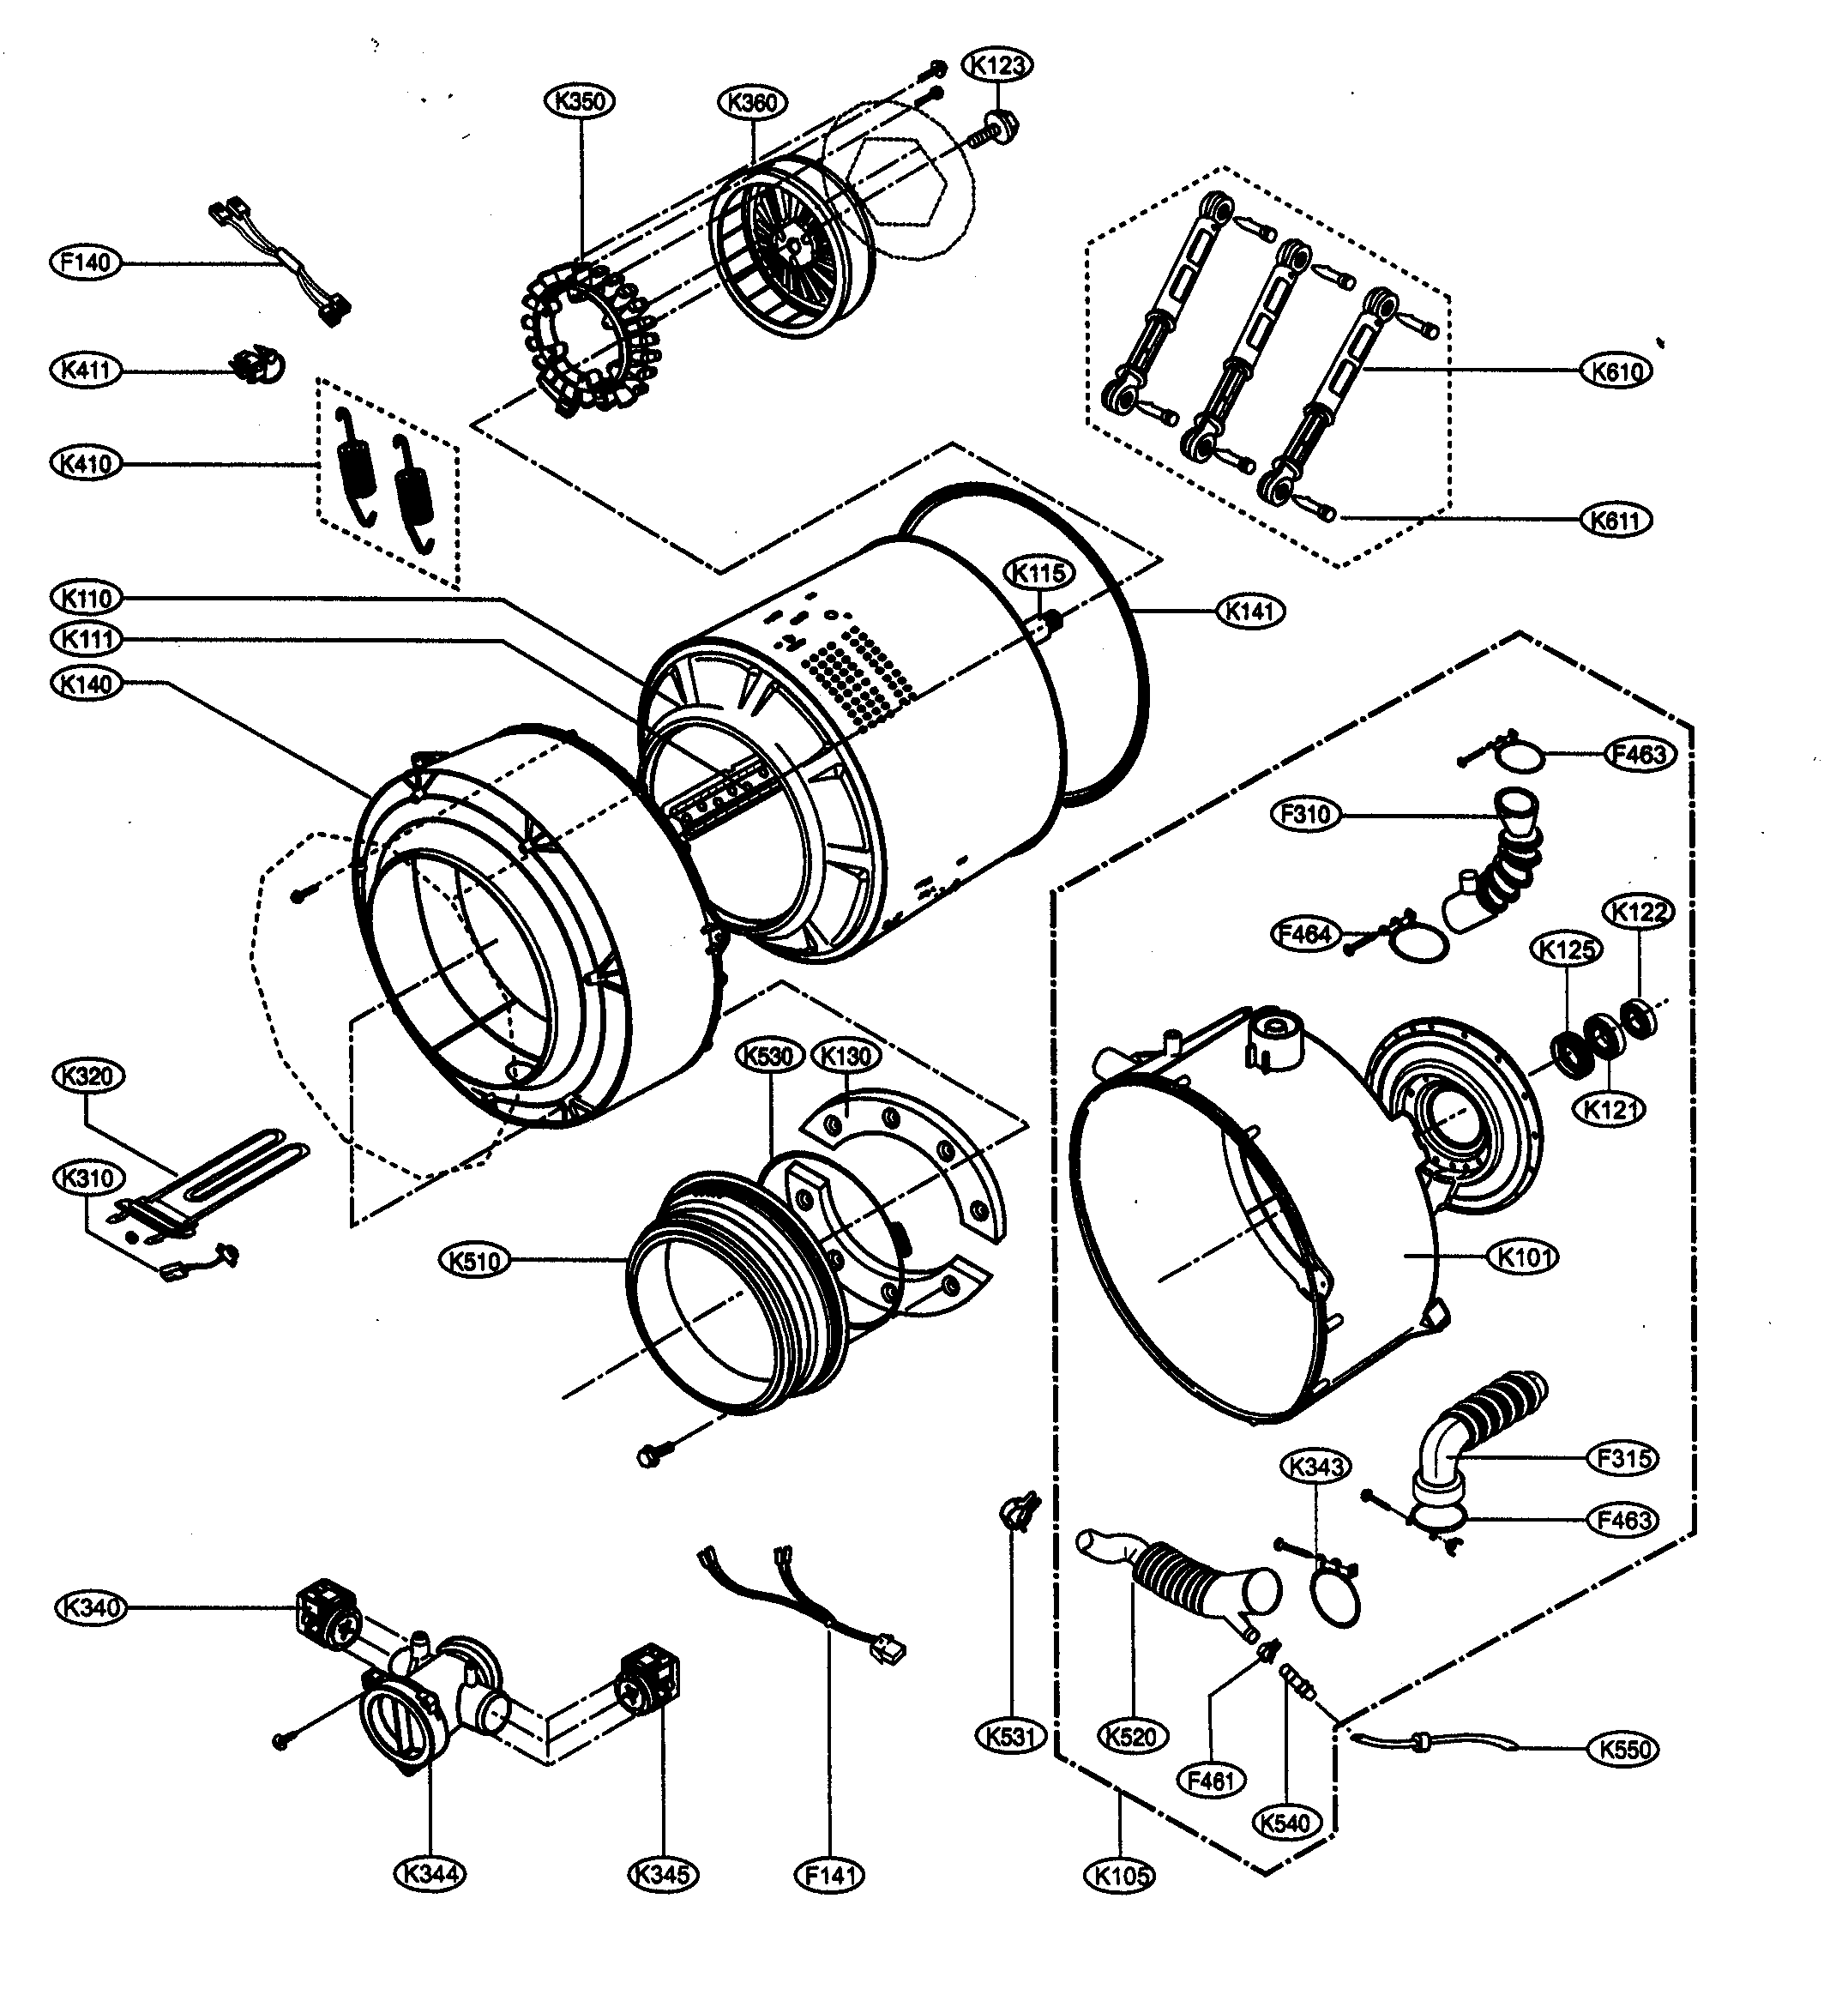 Lg Washer Parts